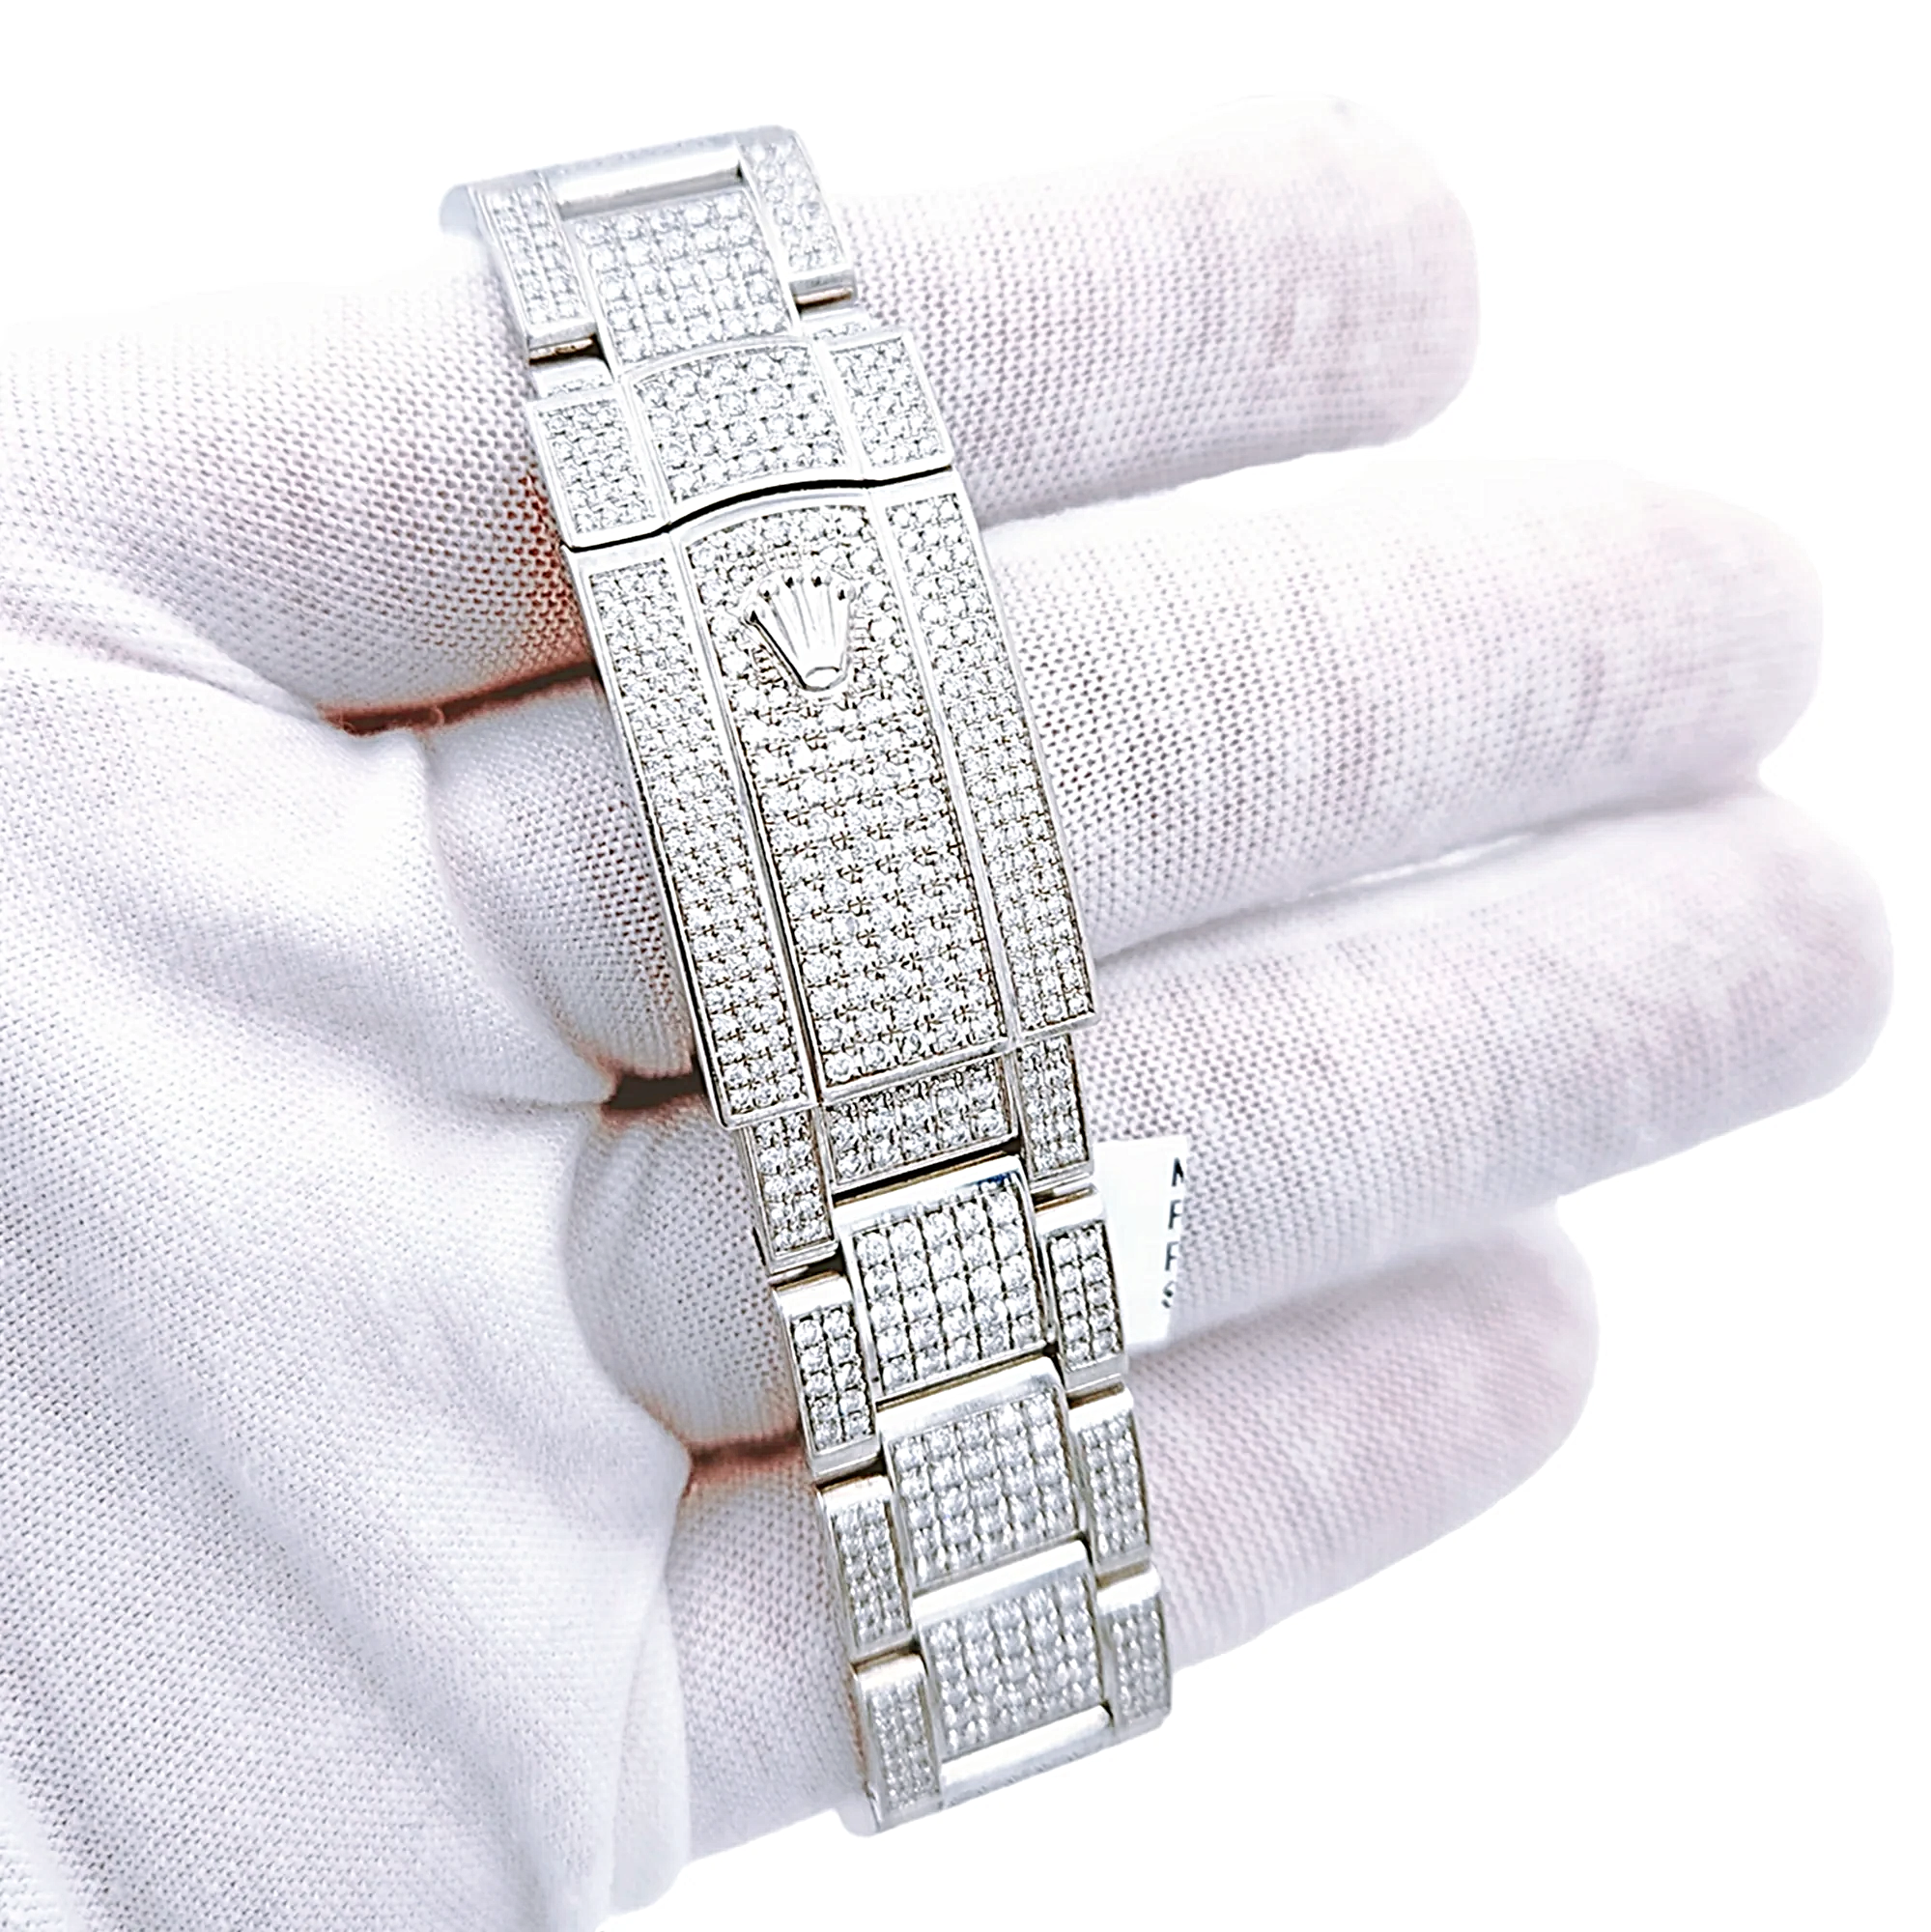 Men's Rolex 40mm DateJust Diamond Bracelet / Stainless Steel Watch with Diamond Dial and Diamond Bezel. (Pre-Owned)